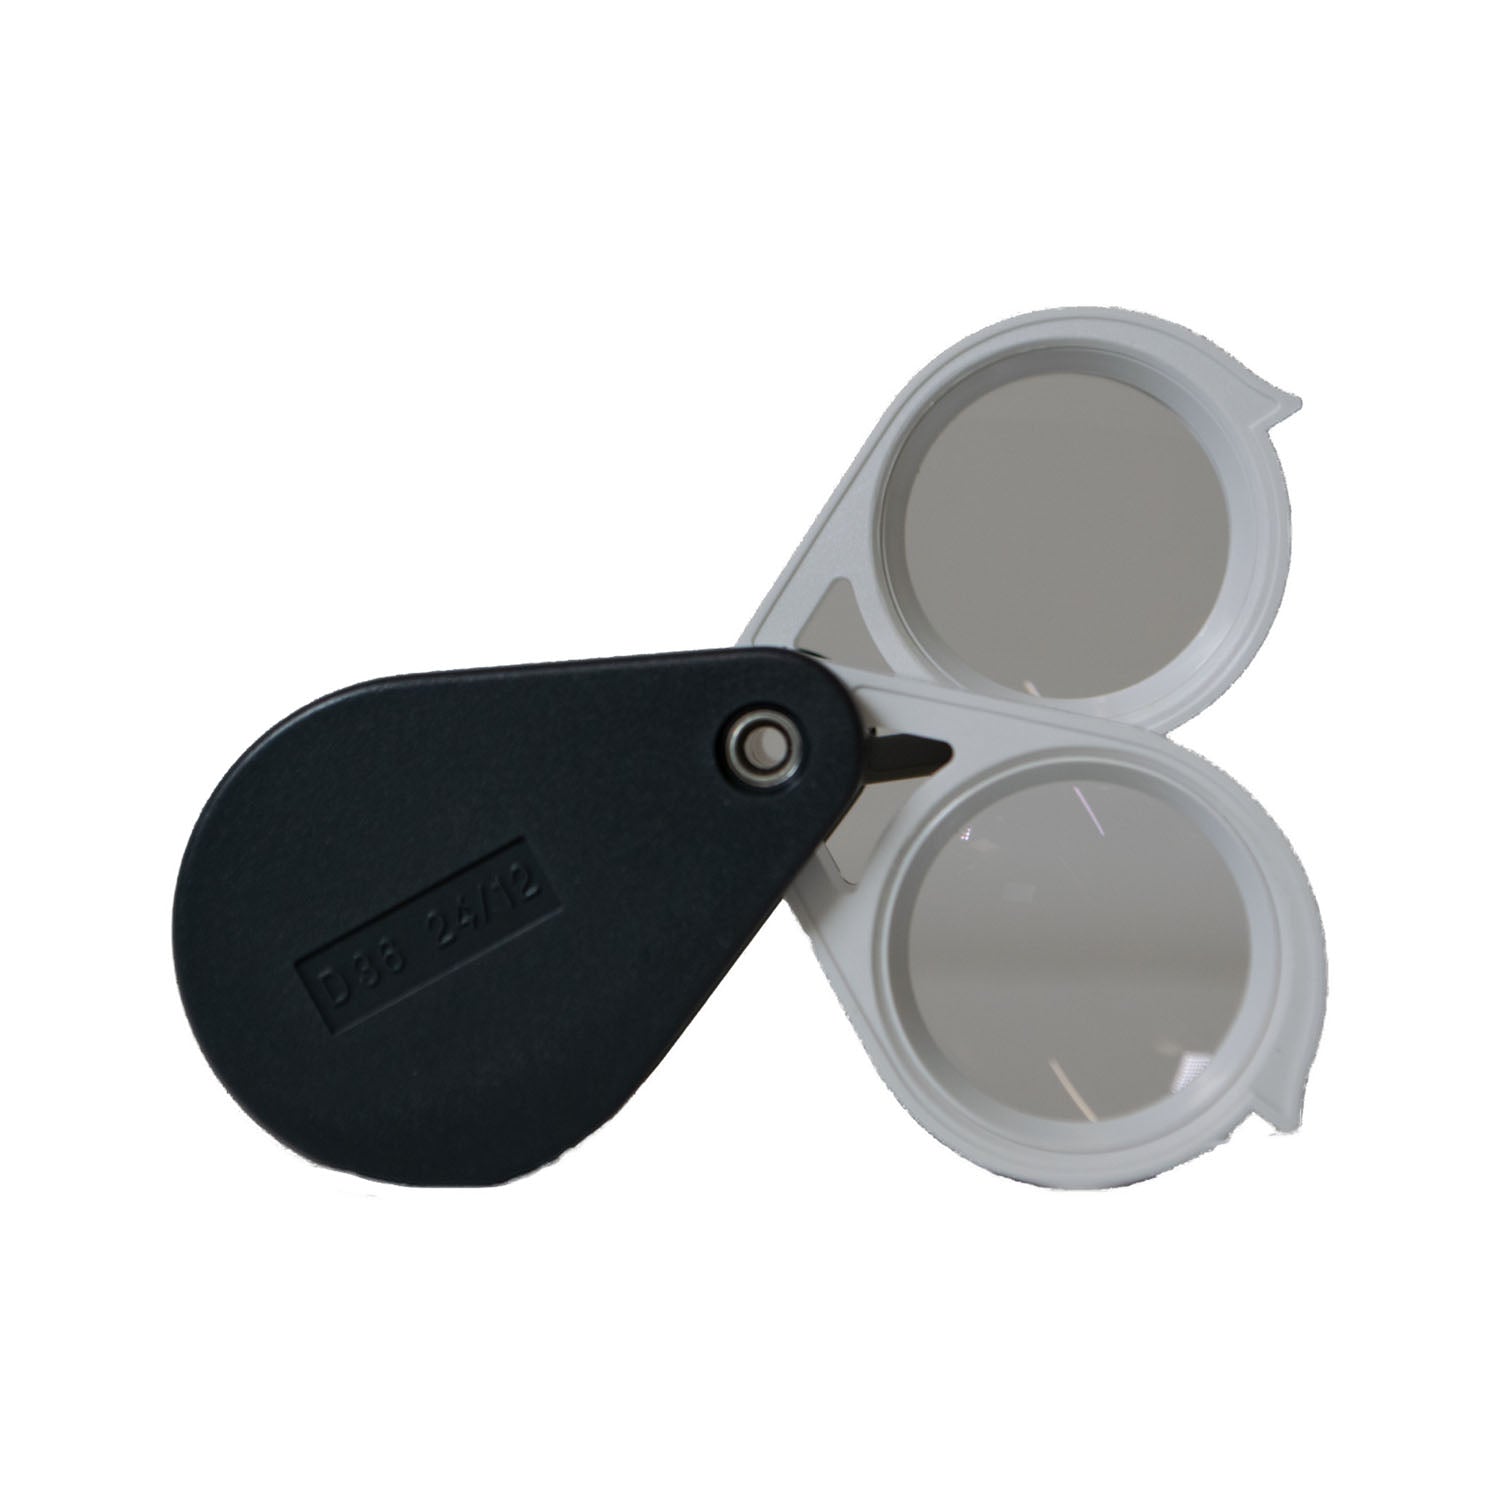 ZEISS Magnifying glass Aplanatic-achromatic Pocket Magnifiers, 40D / 10x